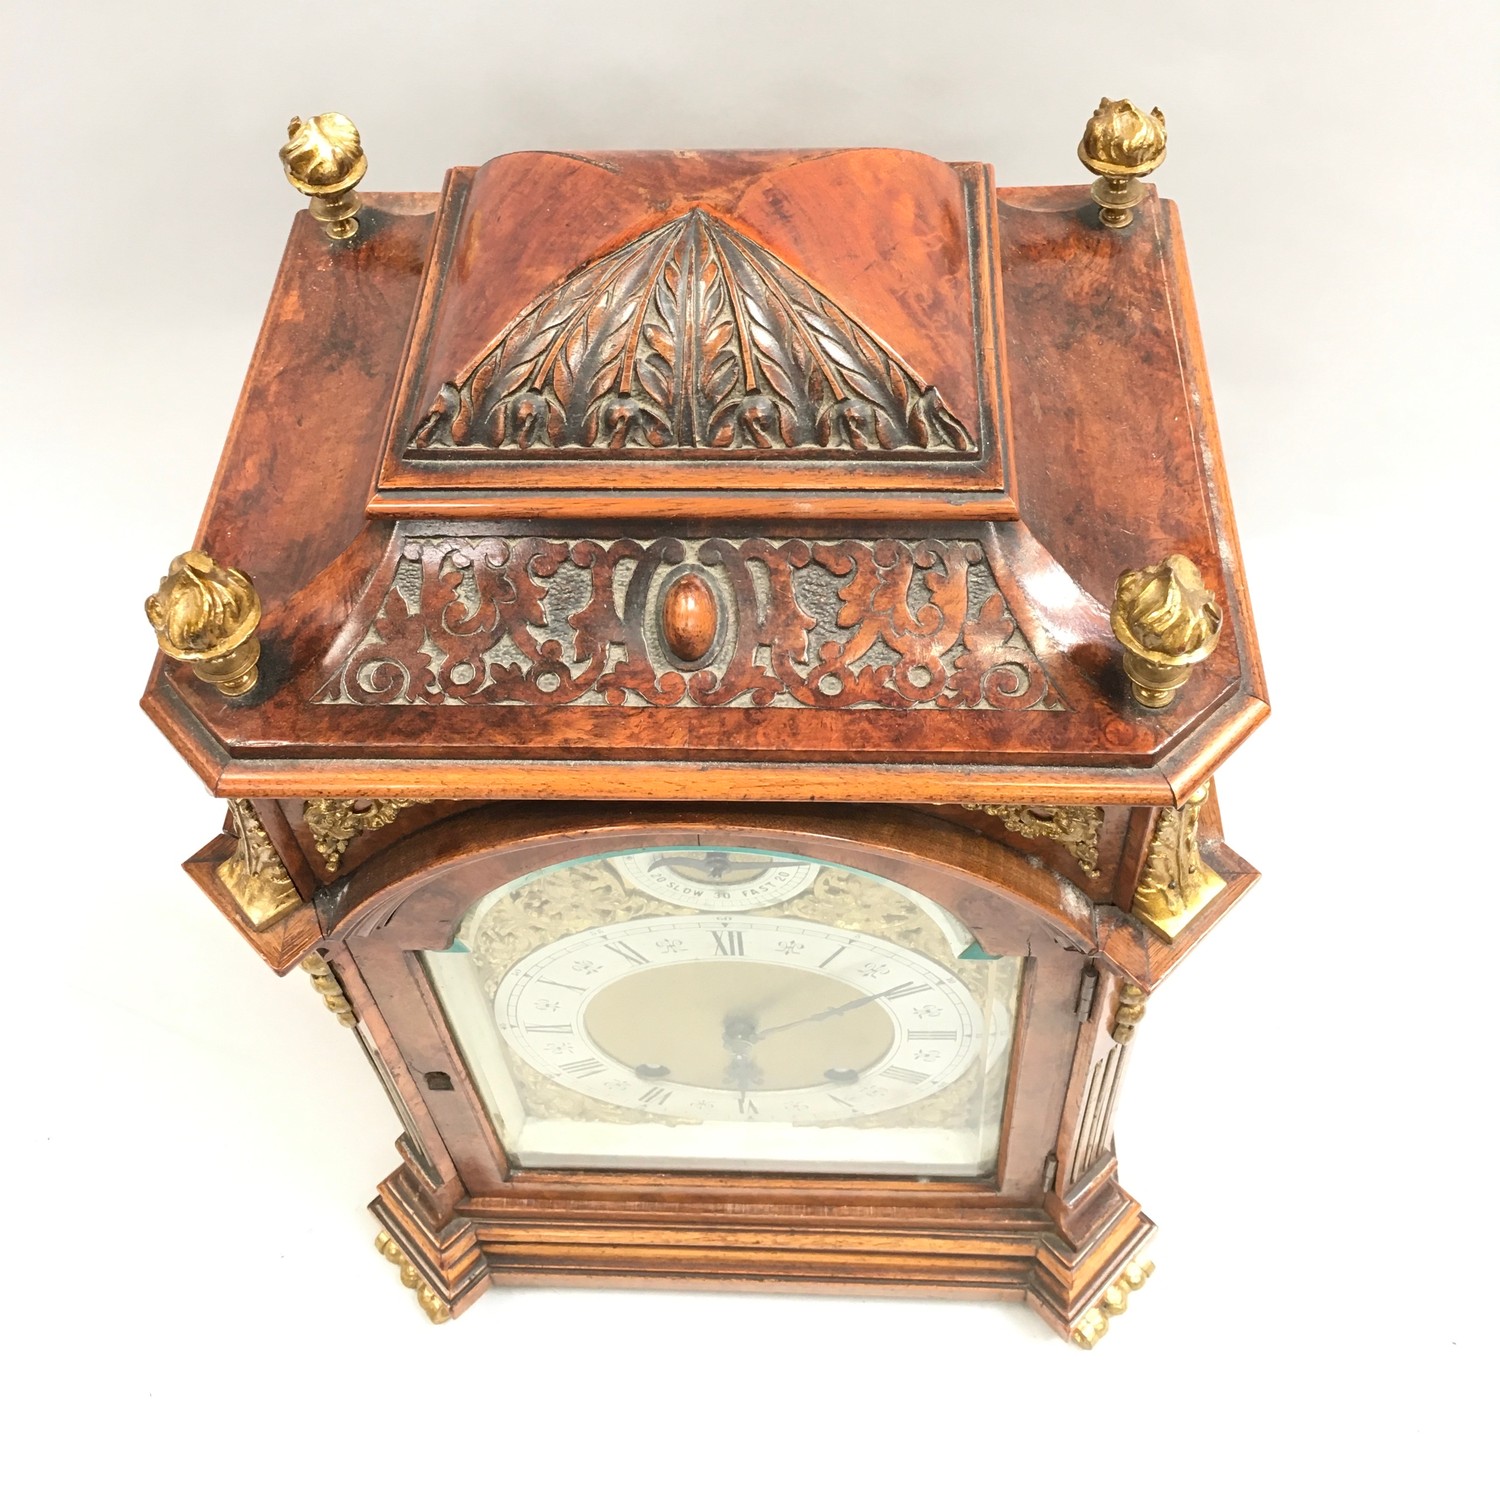 Walnut ormalu mounted striking bracket clock on brass feet with brass dial ,manufactured by - Image 2 of 9